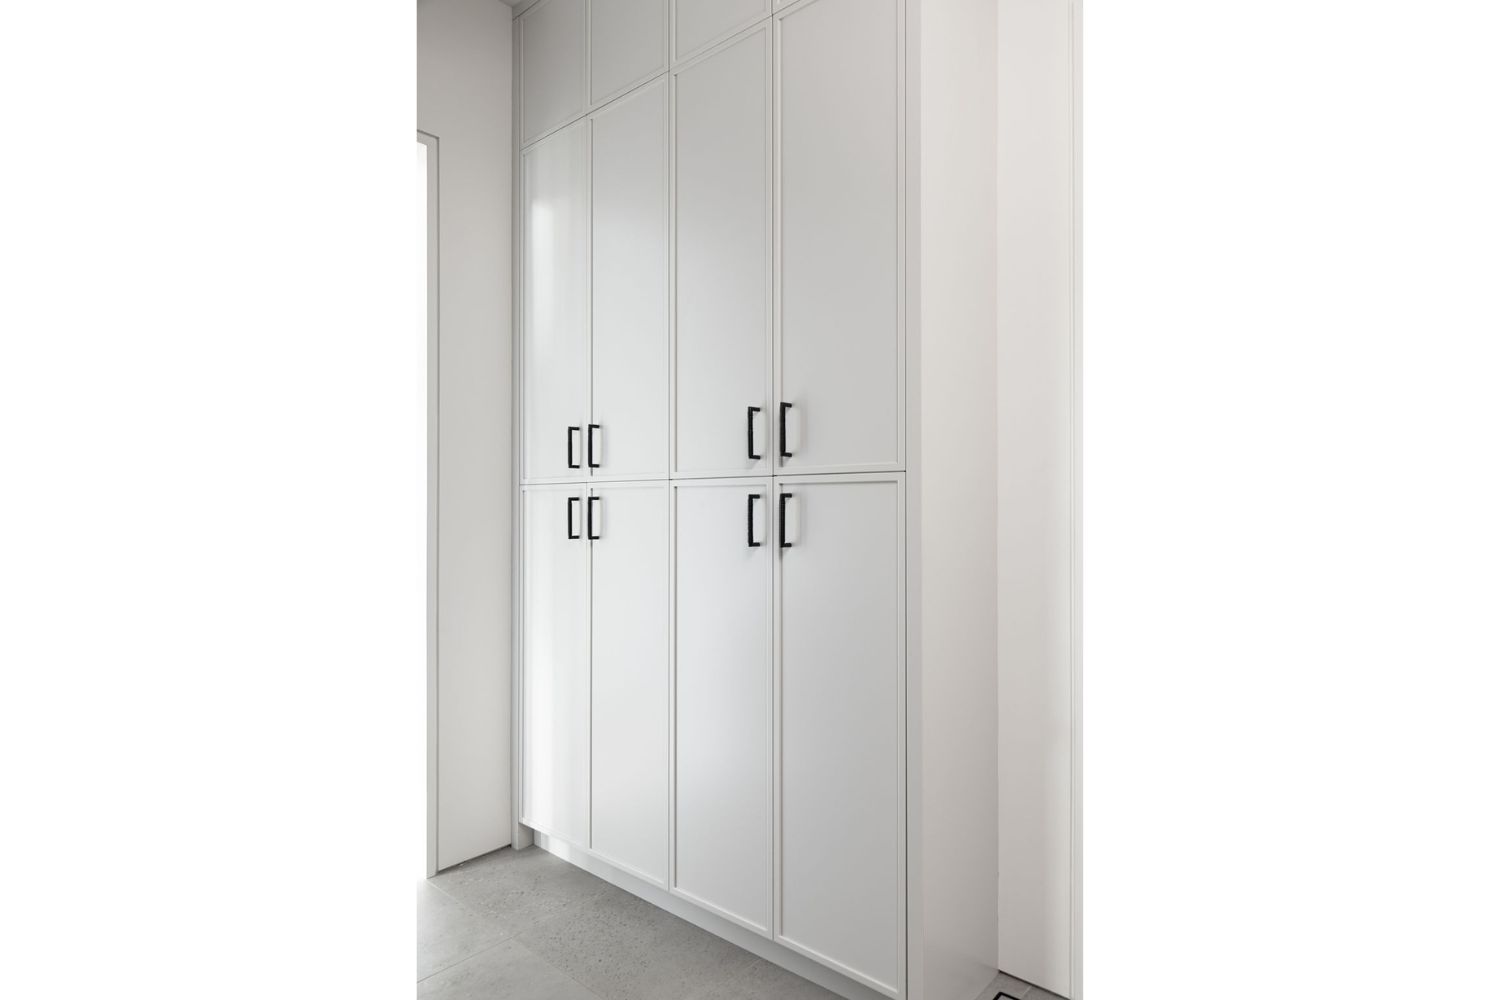 Project Fieldale: Shaker panel doors for laundry pantry